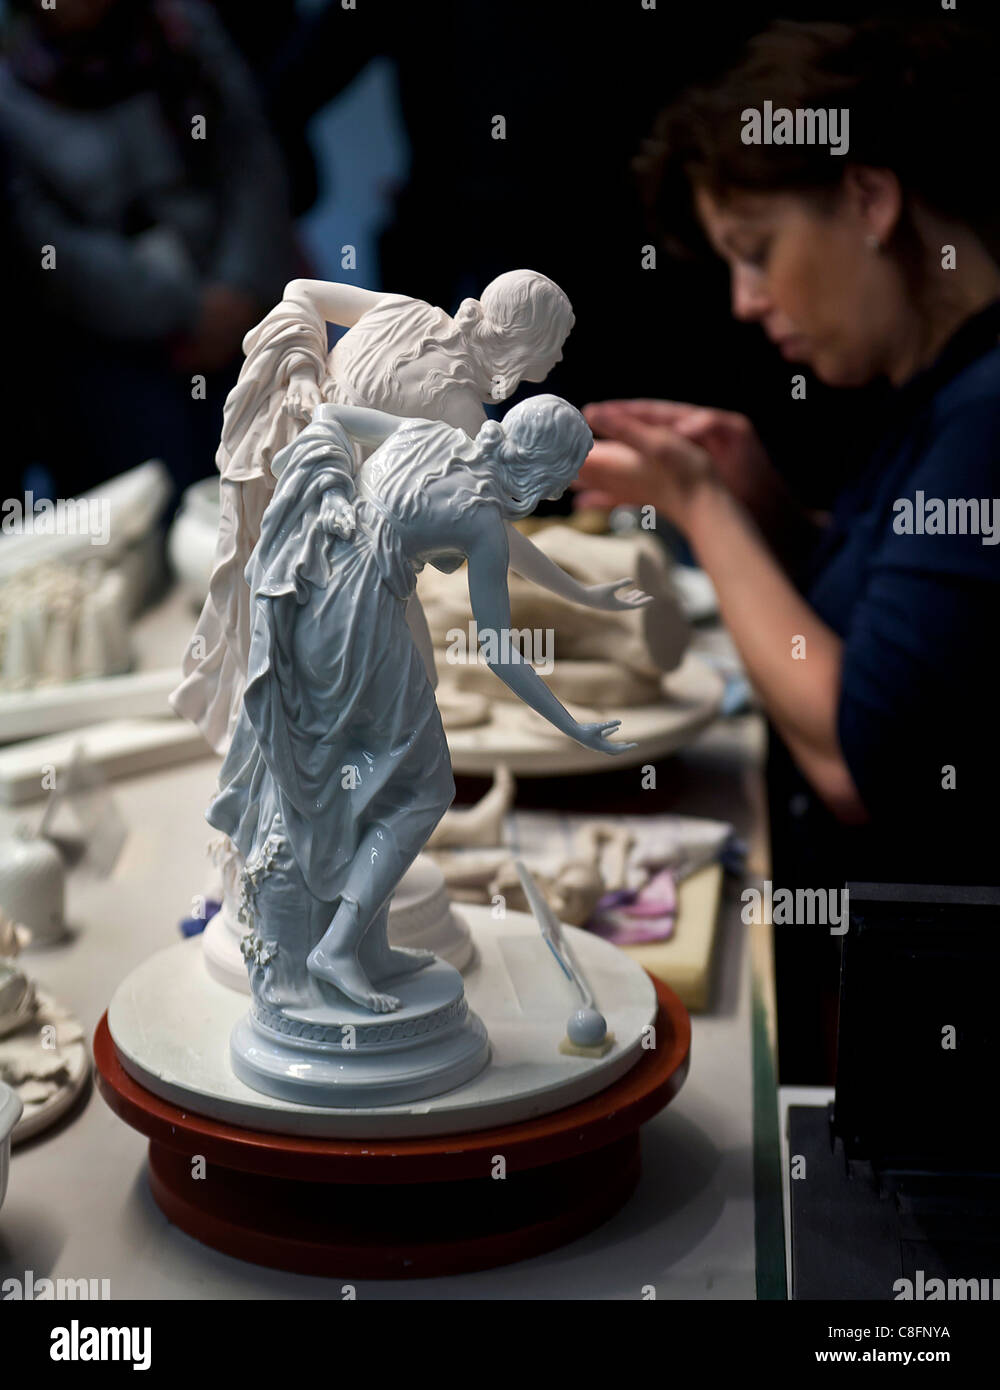 Two Meissen porcelain figure with the craftsperson in the background. Stock Photo